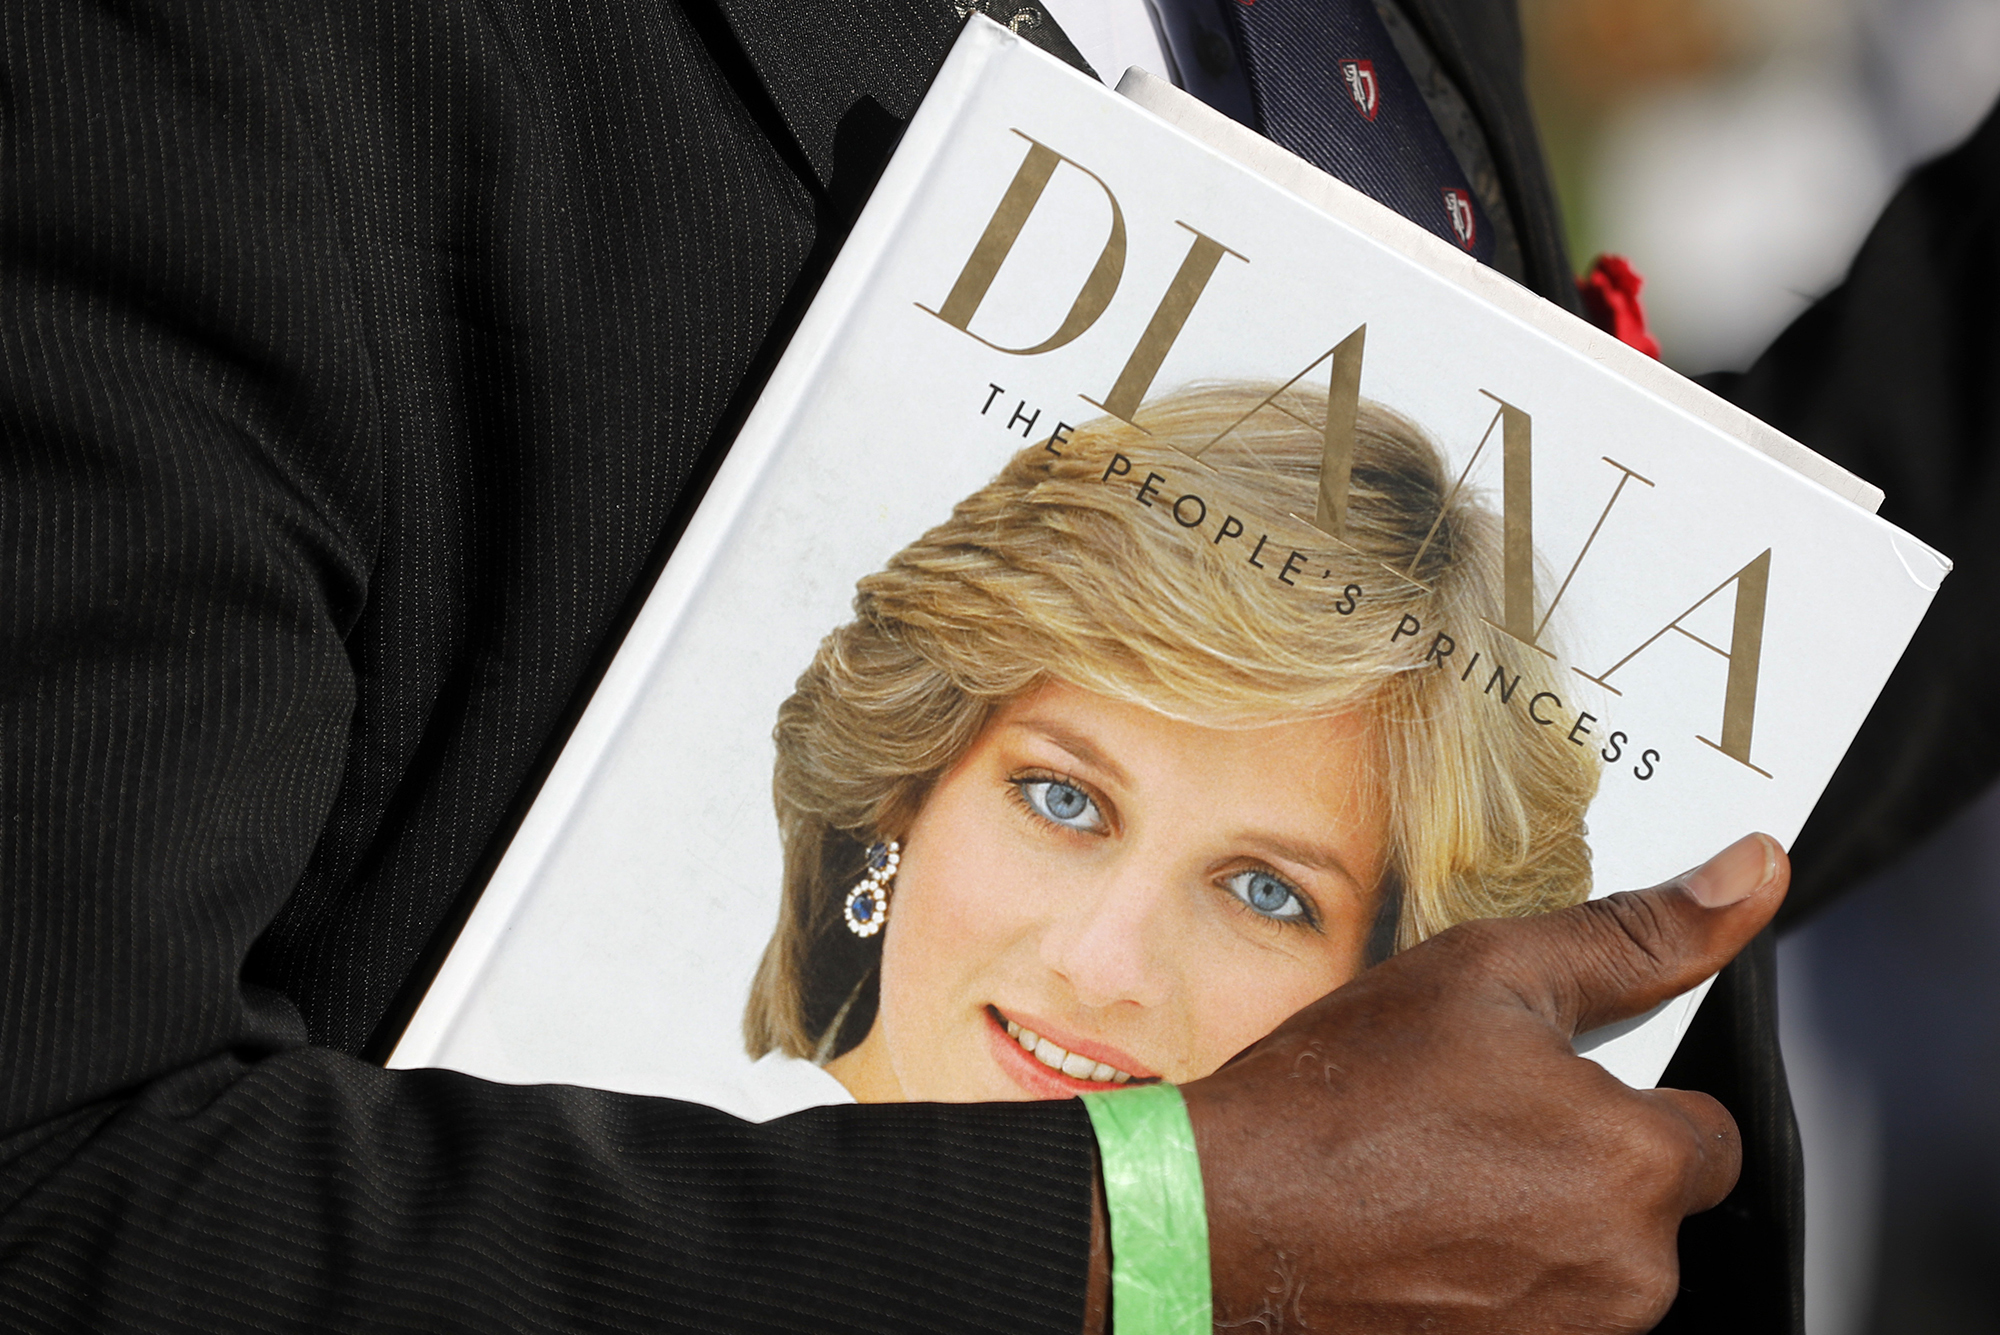 A book entitled "Diana, the People's Princess" with a photo of her face is being held by a man in a suit